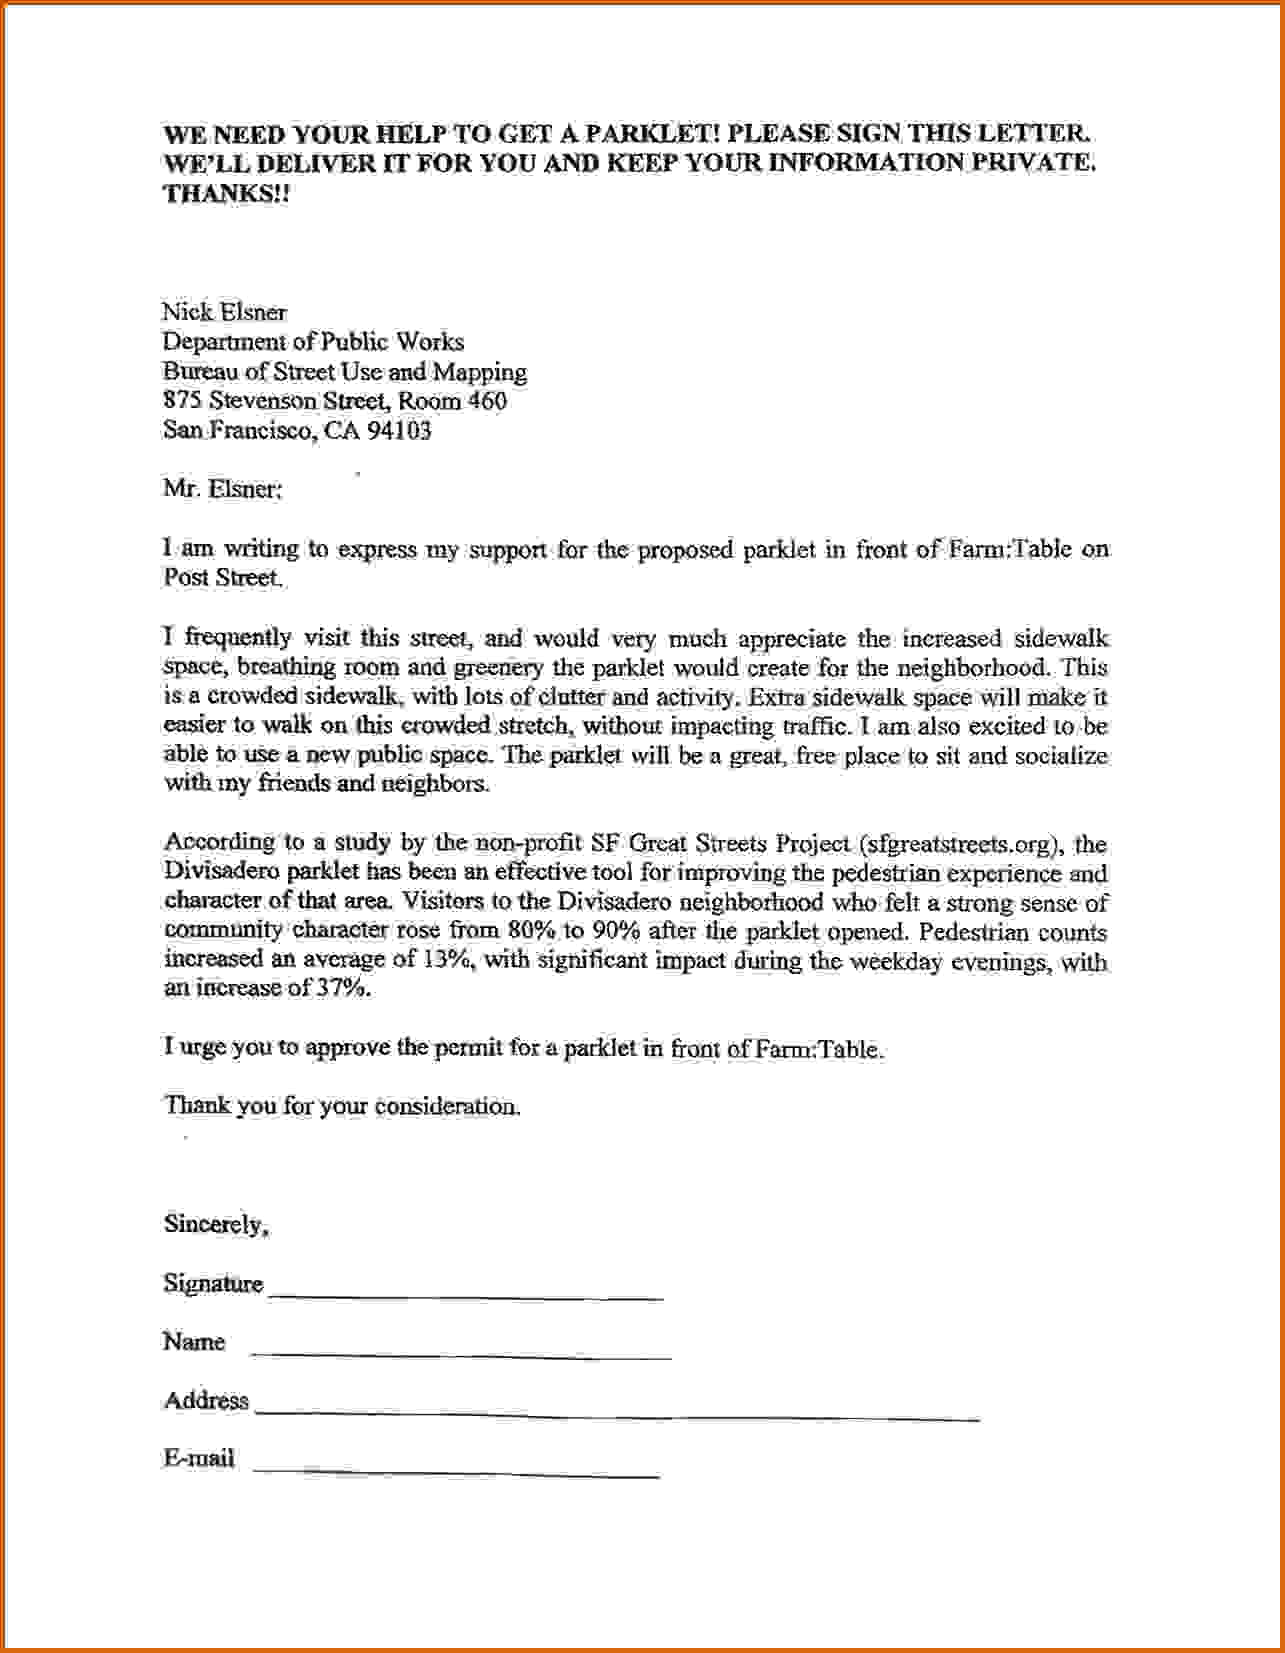 Petition Letter Template - How to Write A Petition Letter Sample Image Collections Letter